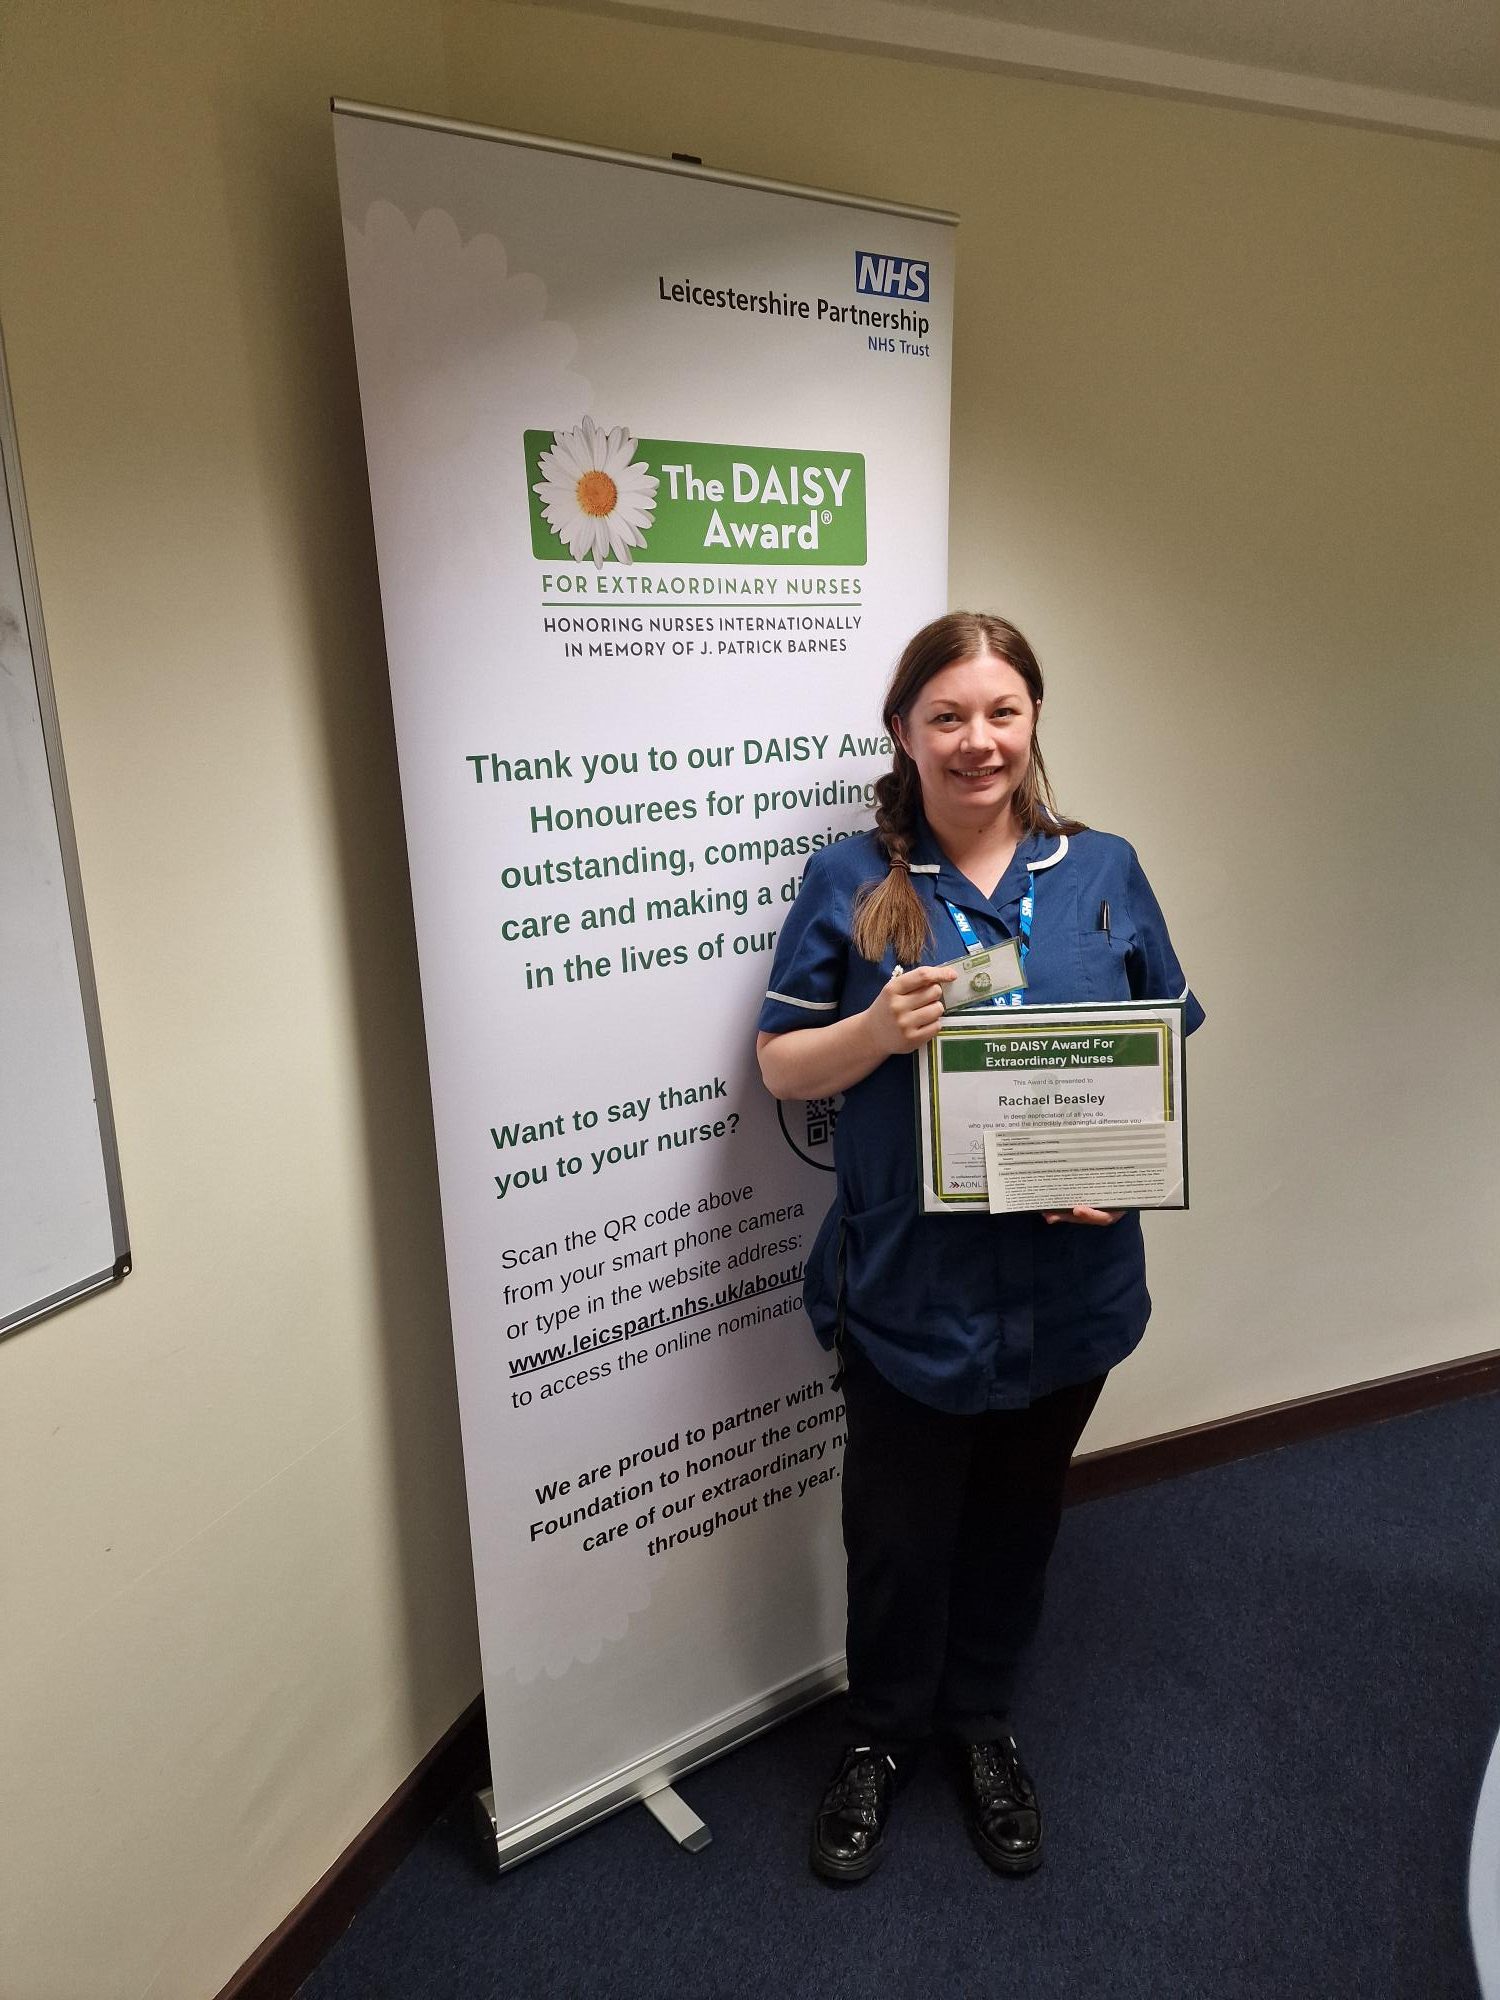 Photo of Rachael Beasley, smiling in her uniform, and holding DAISY Award certificate and pin badge